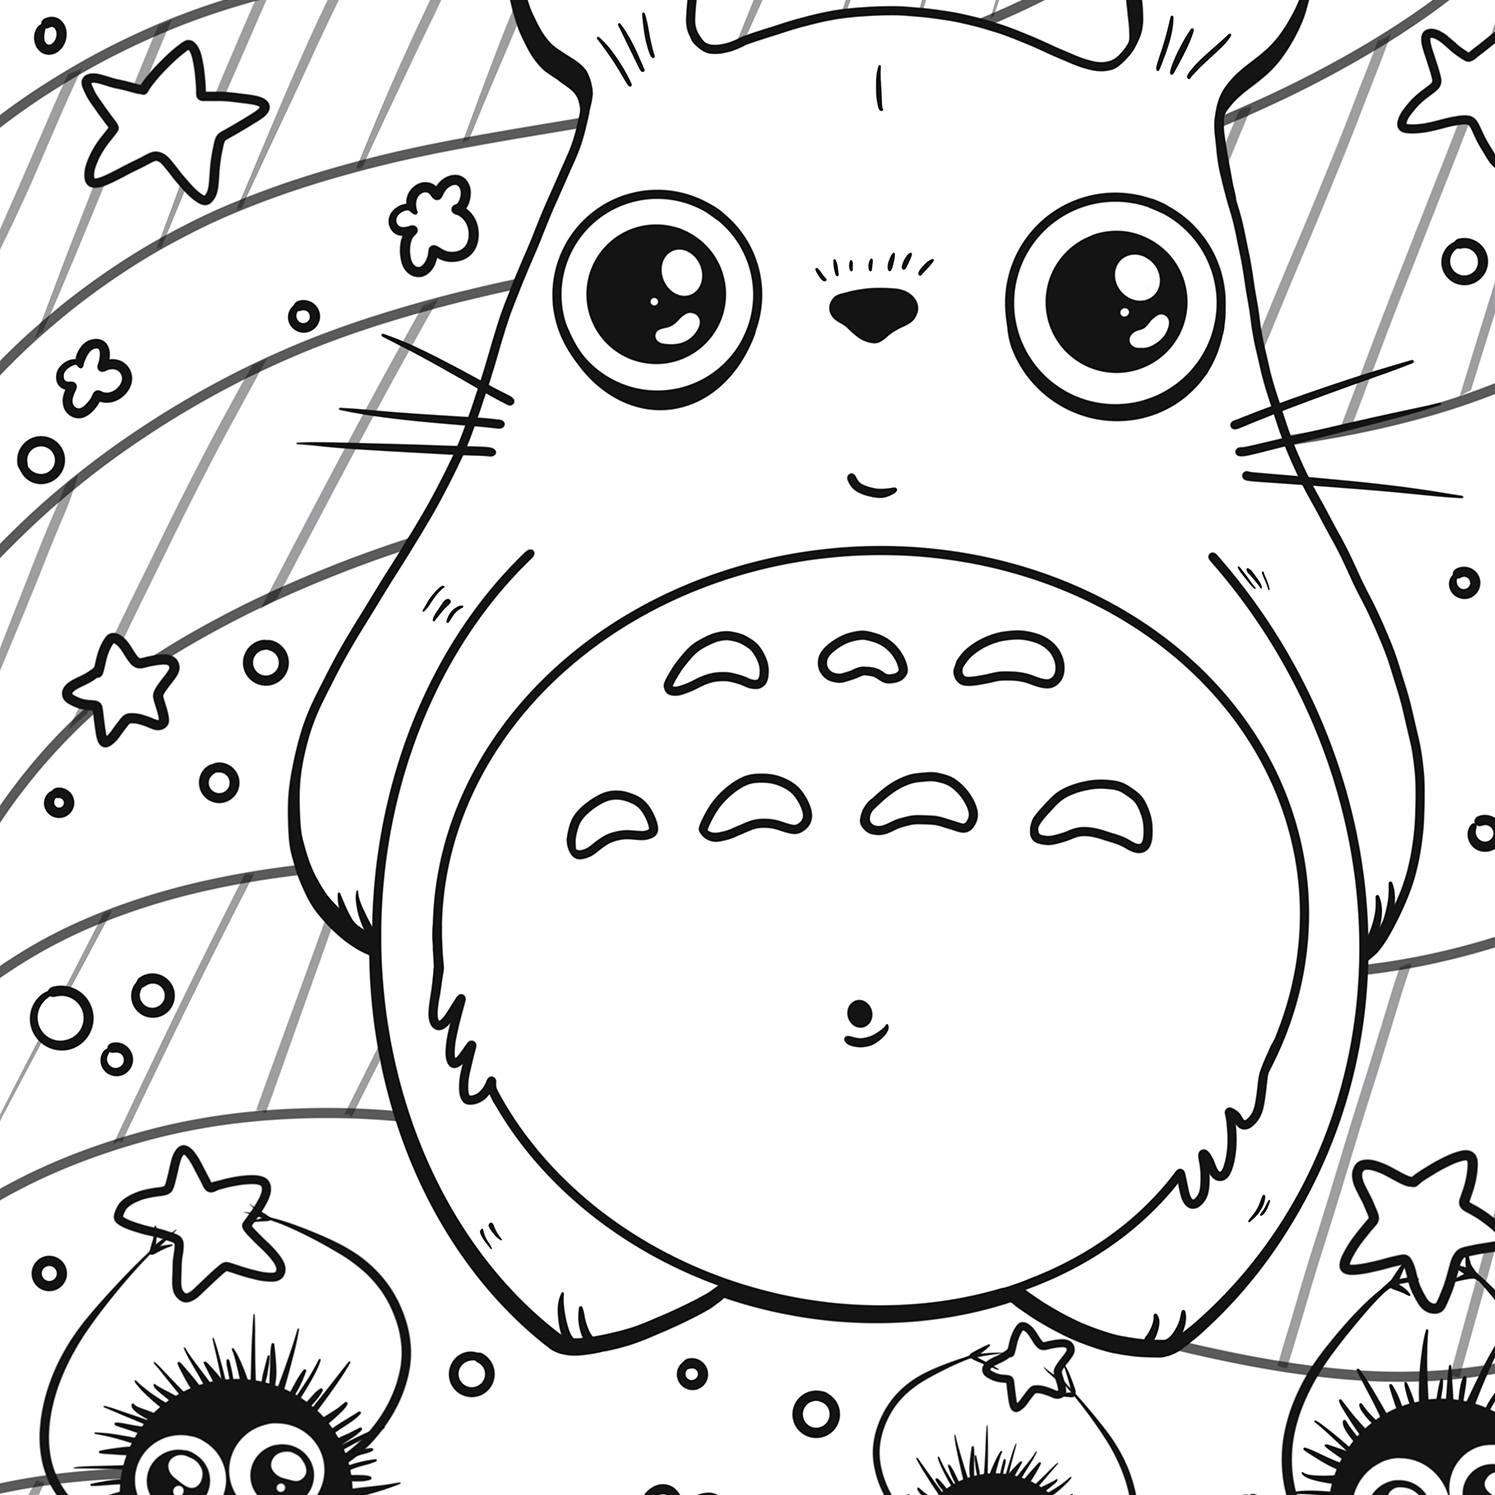 Totoro soot sprites coloring page digital download â stace of spades